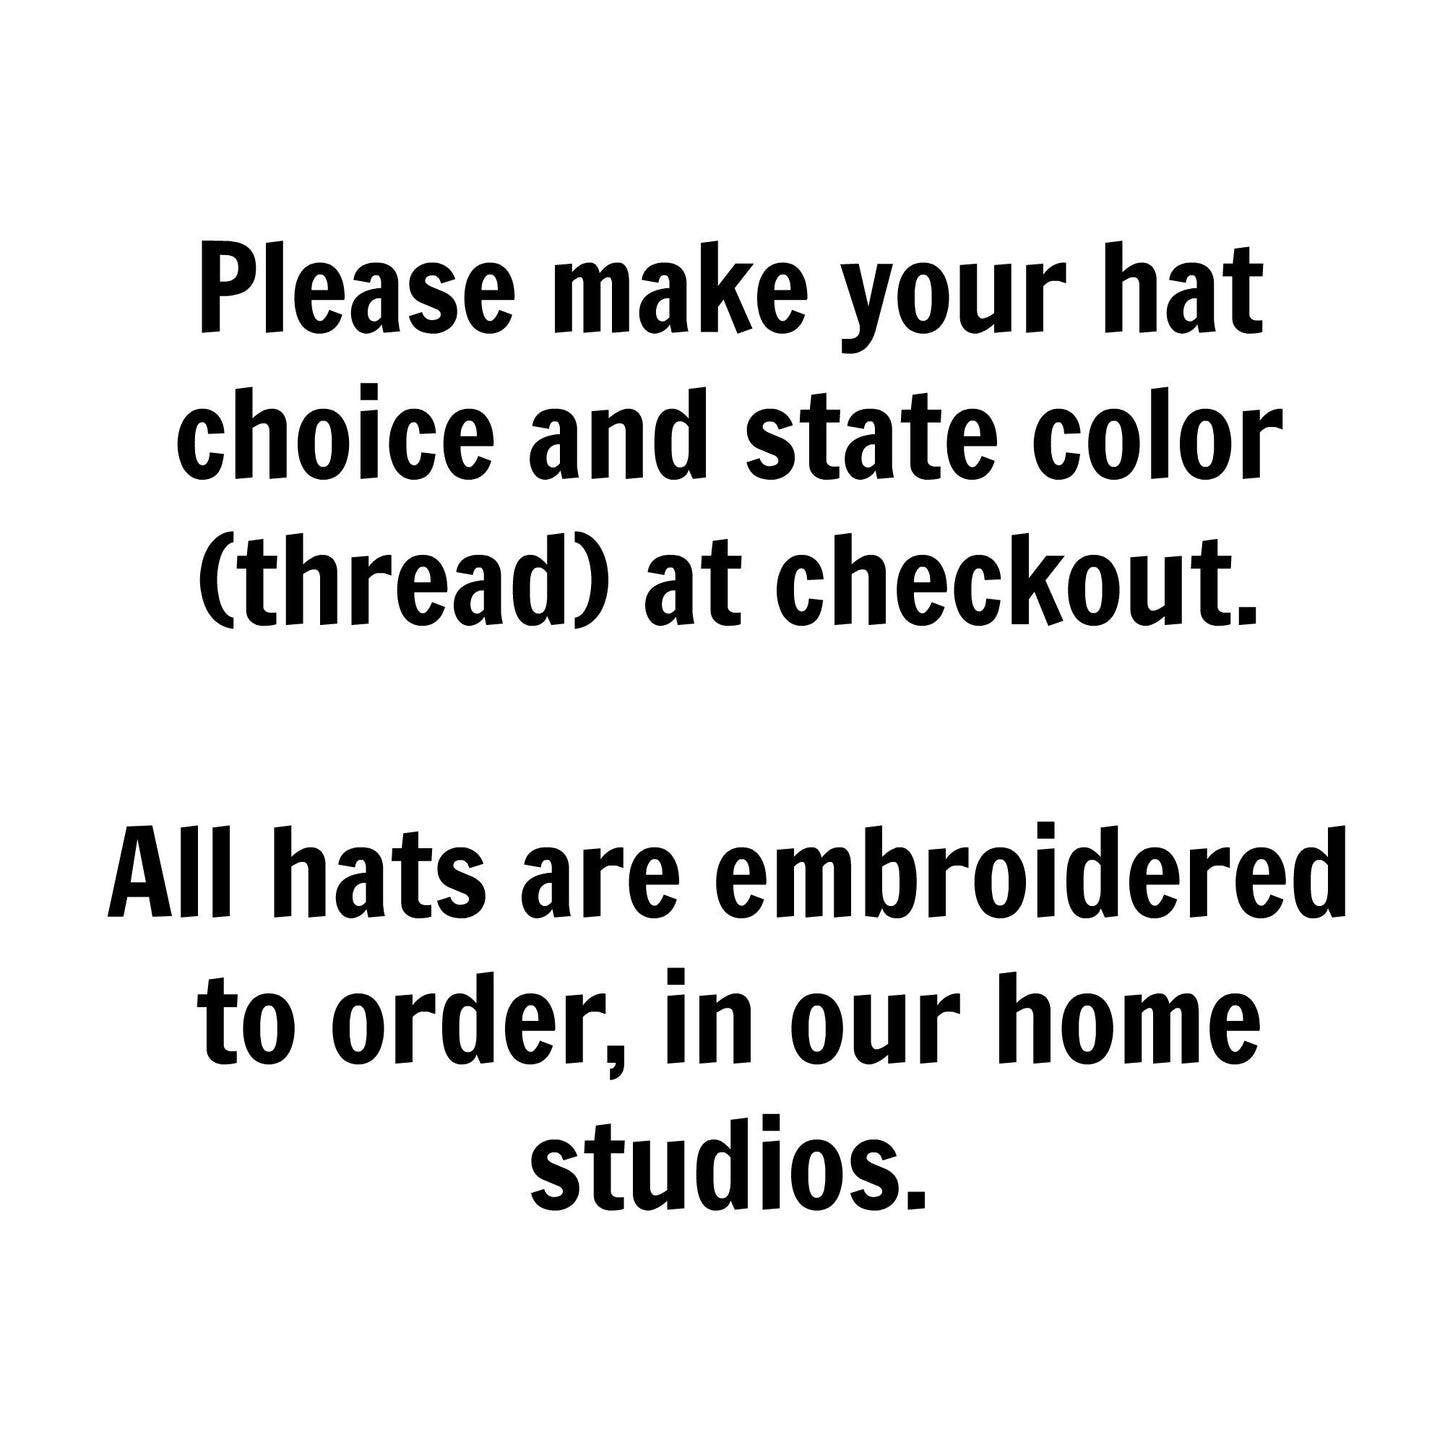 Iowa  Hat | Distressed Snapback Trucker | state cap | many color choices